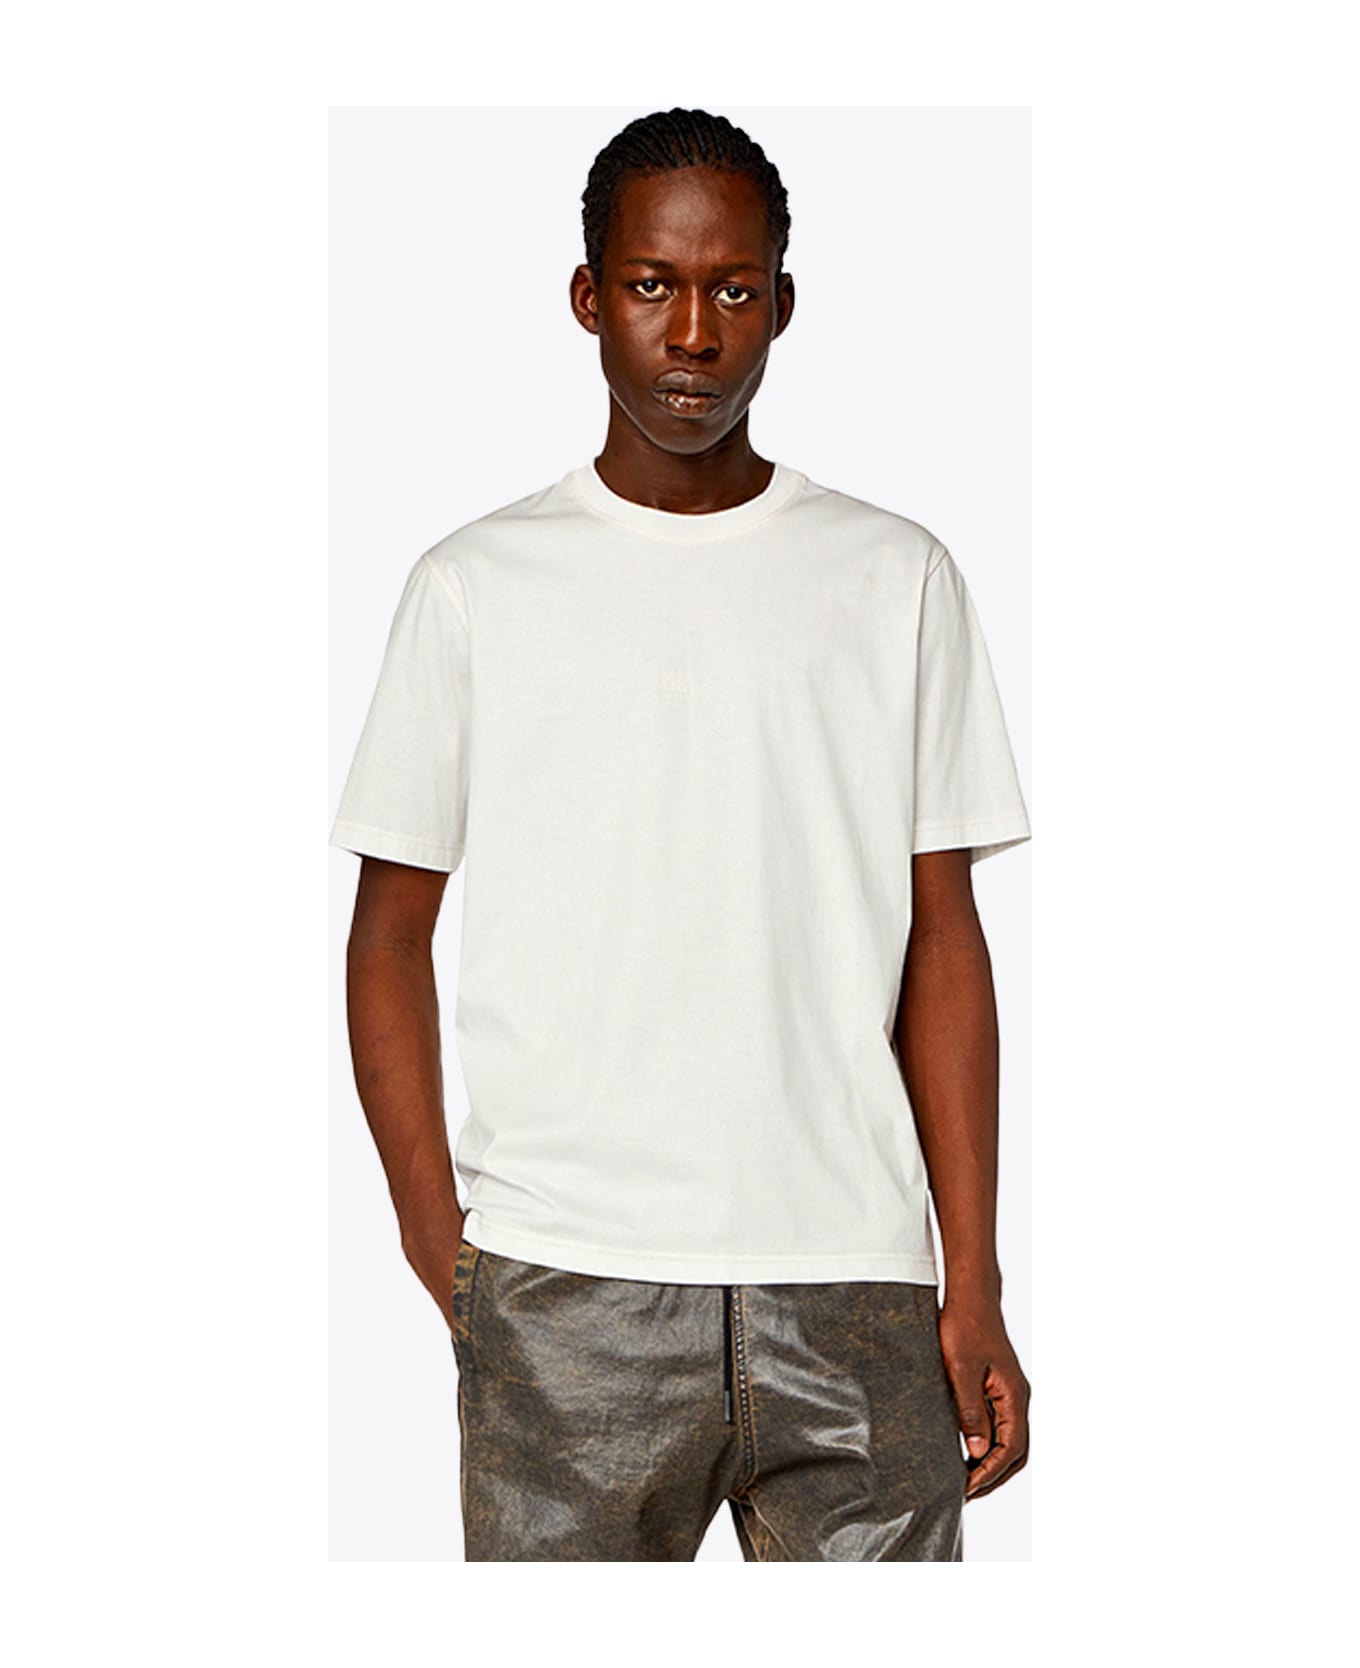 Diesel T-must-slits-n2 White Cotton T-shirt With Tonal Print - T Must Slits N2 シャツ